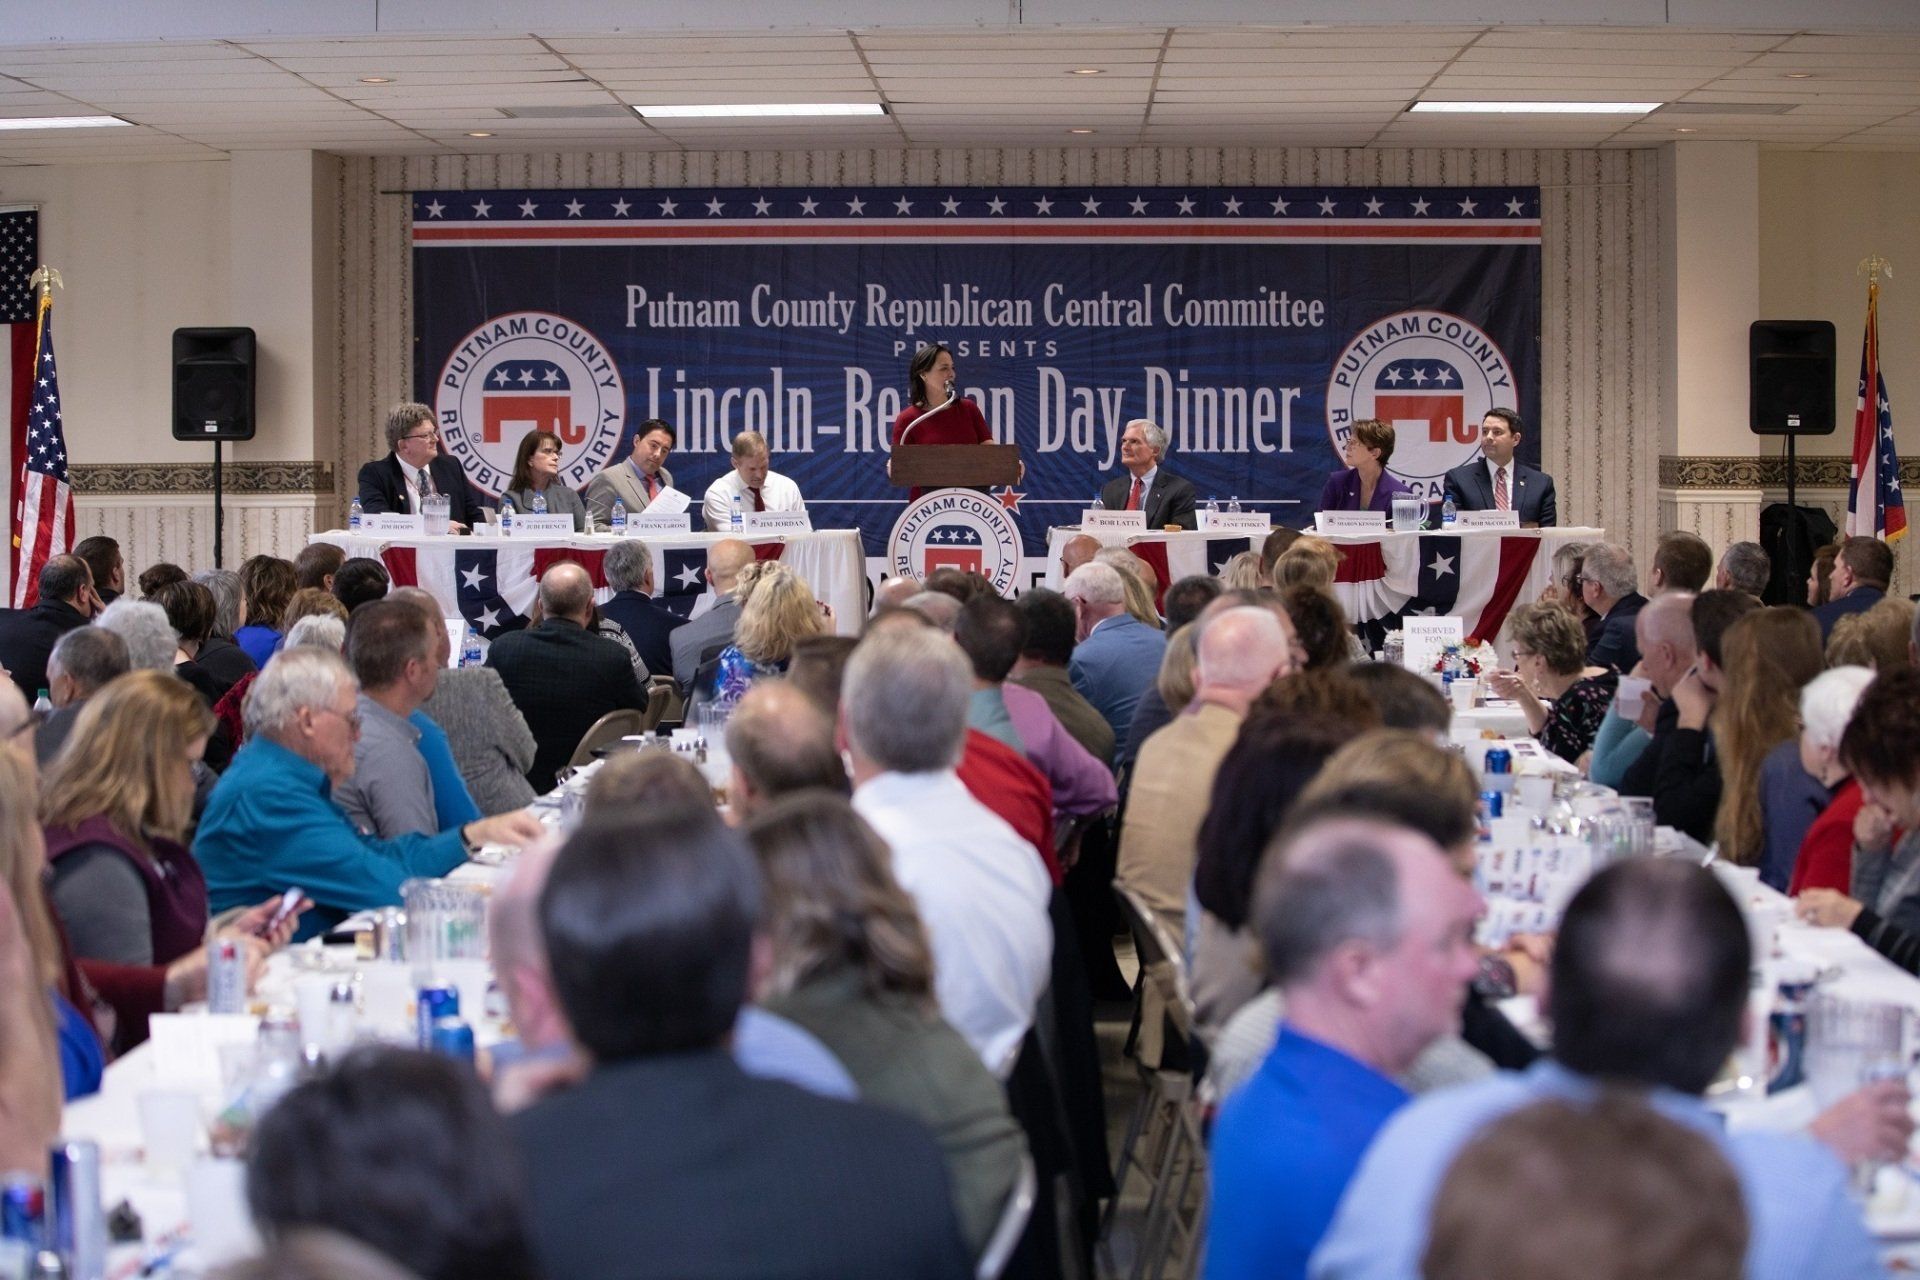 Lincoln Reagan Day Dinners Putnam County Ohio Republican Party GOP